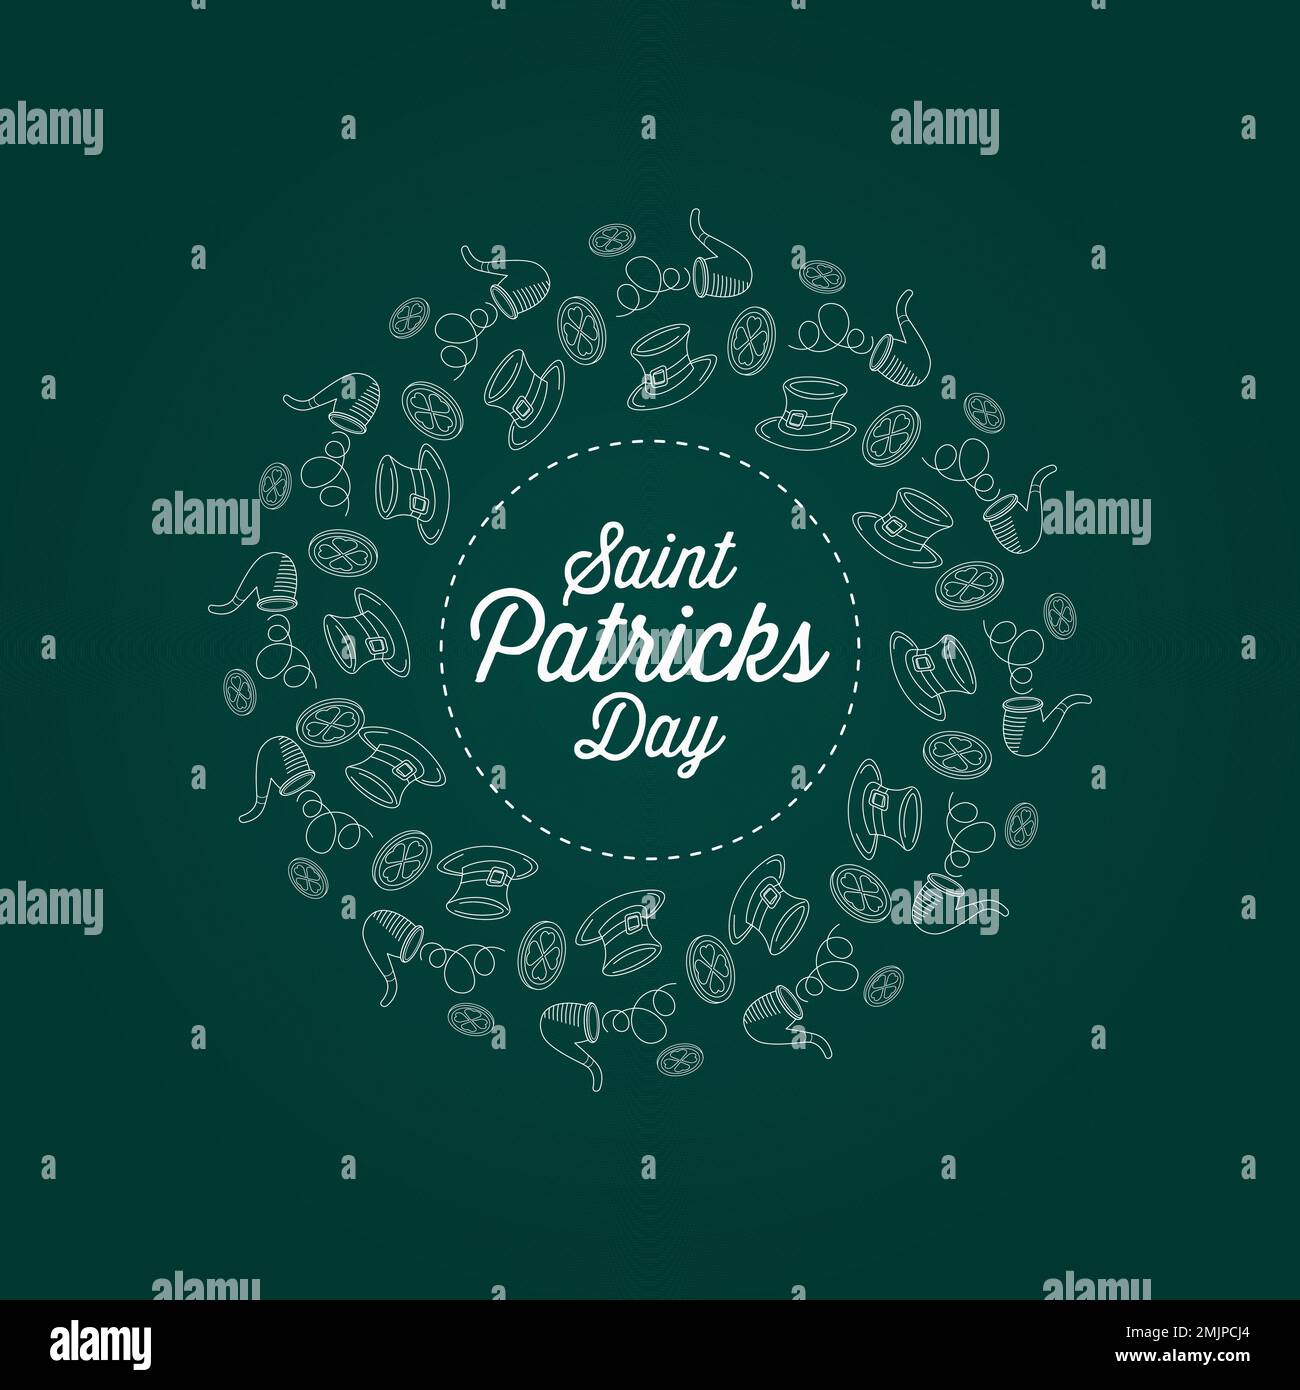 saint patricks day background with image of hat, smoke pipe and gold coins Stock Vector